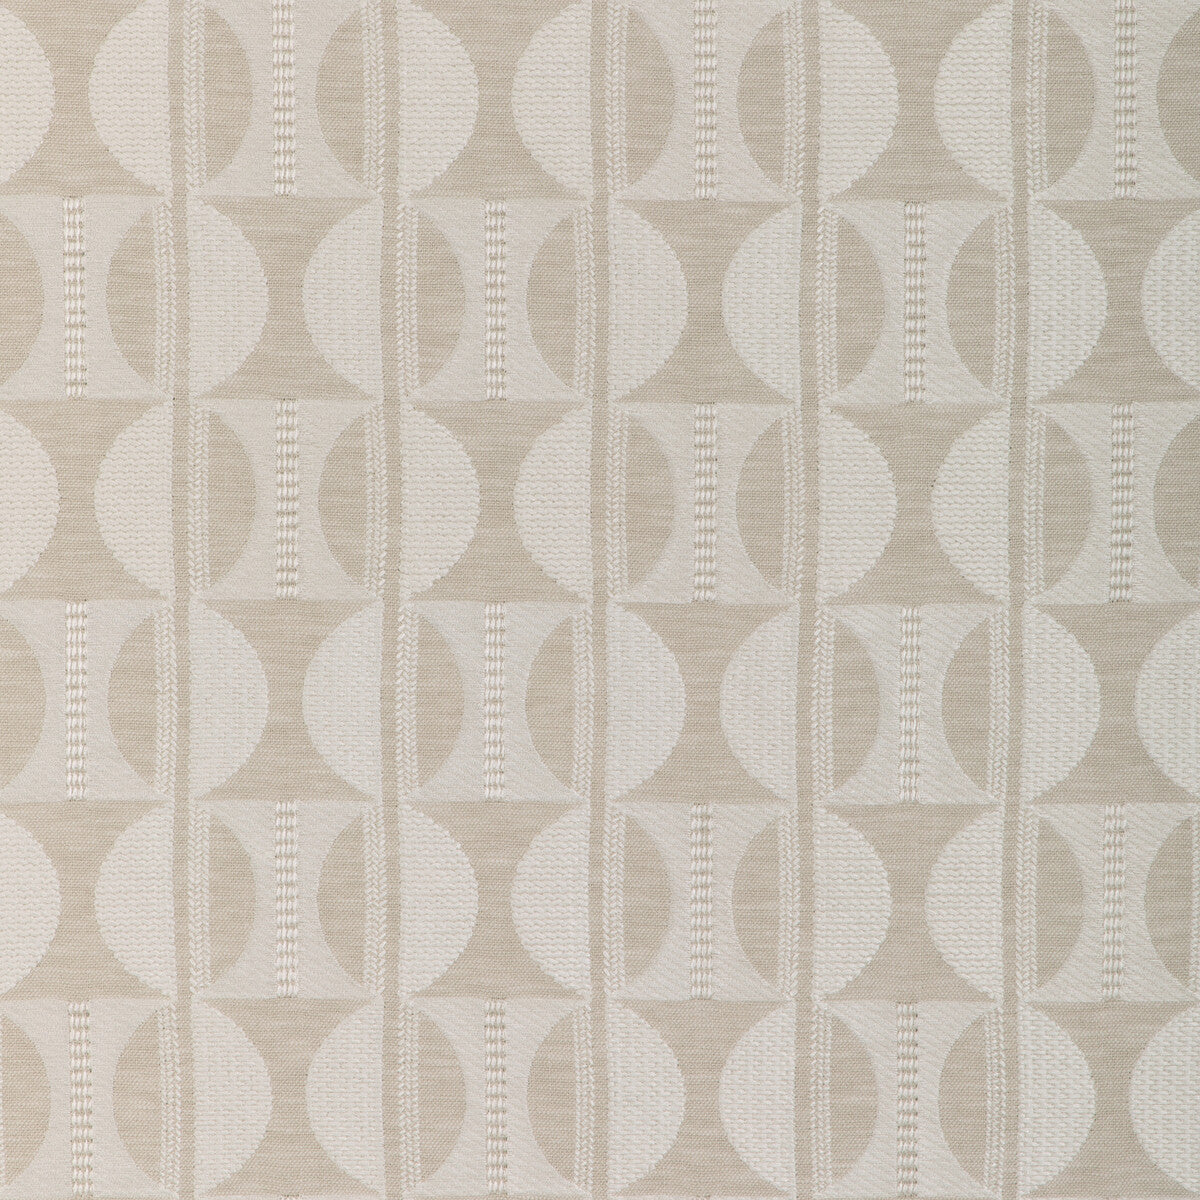 Kravet Basics fabric in 37157-116 color - pattern 37157.116.0 - by Kravet Basics in the Modern Embroideries III collection